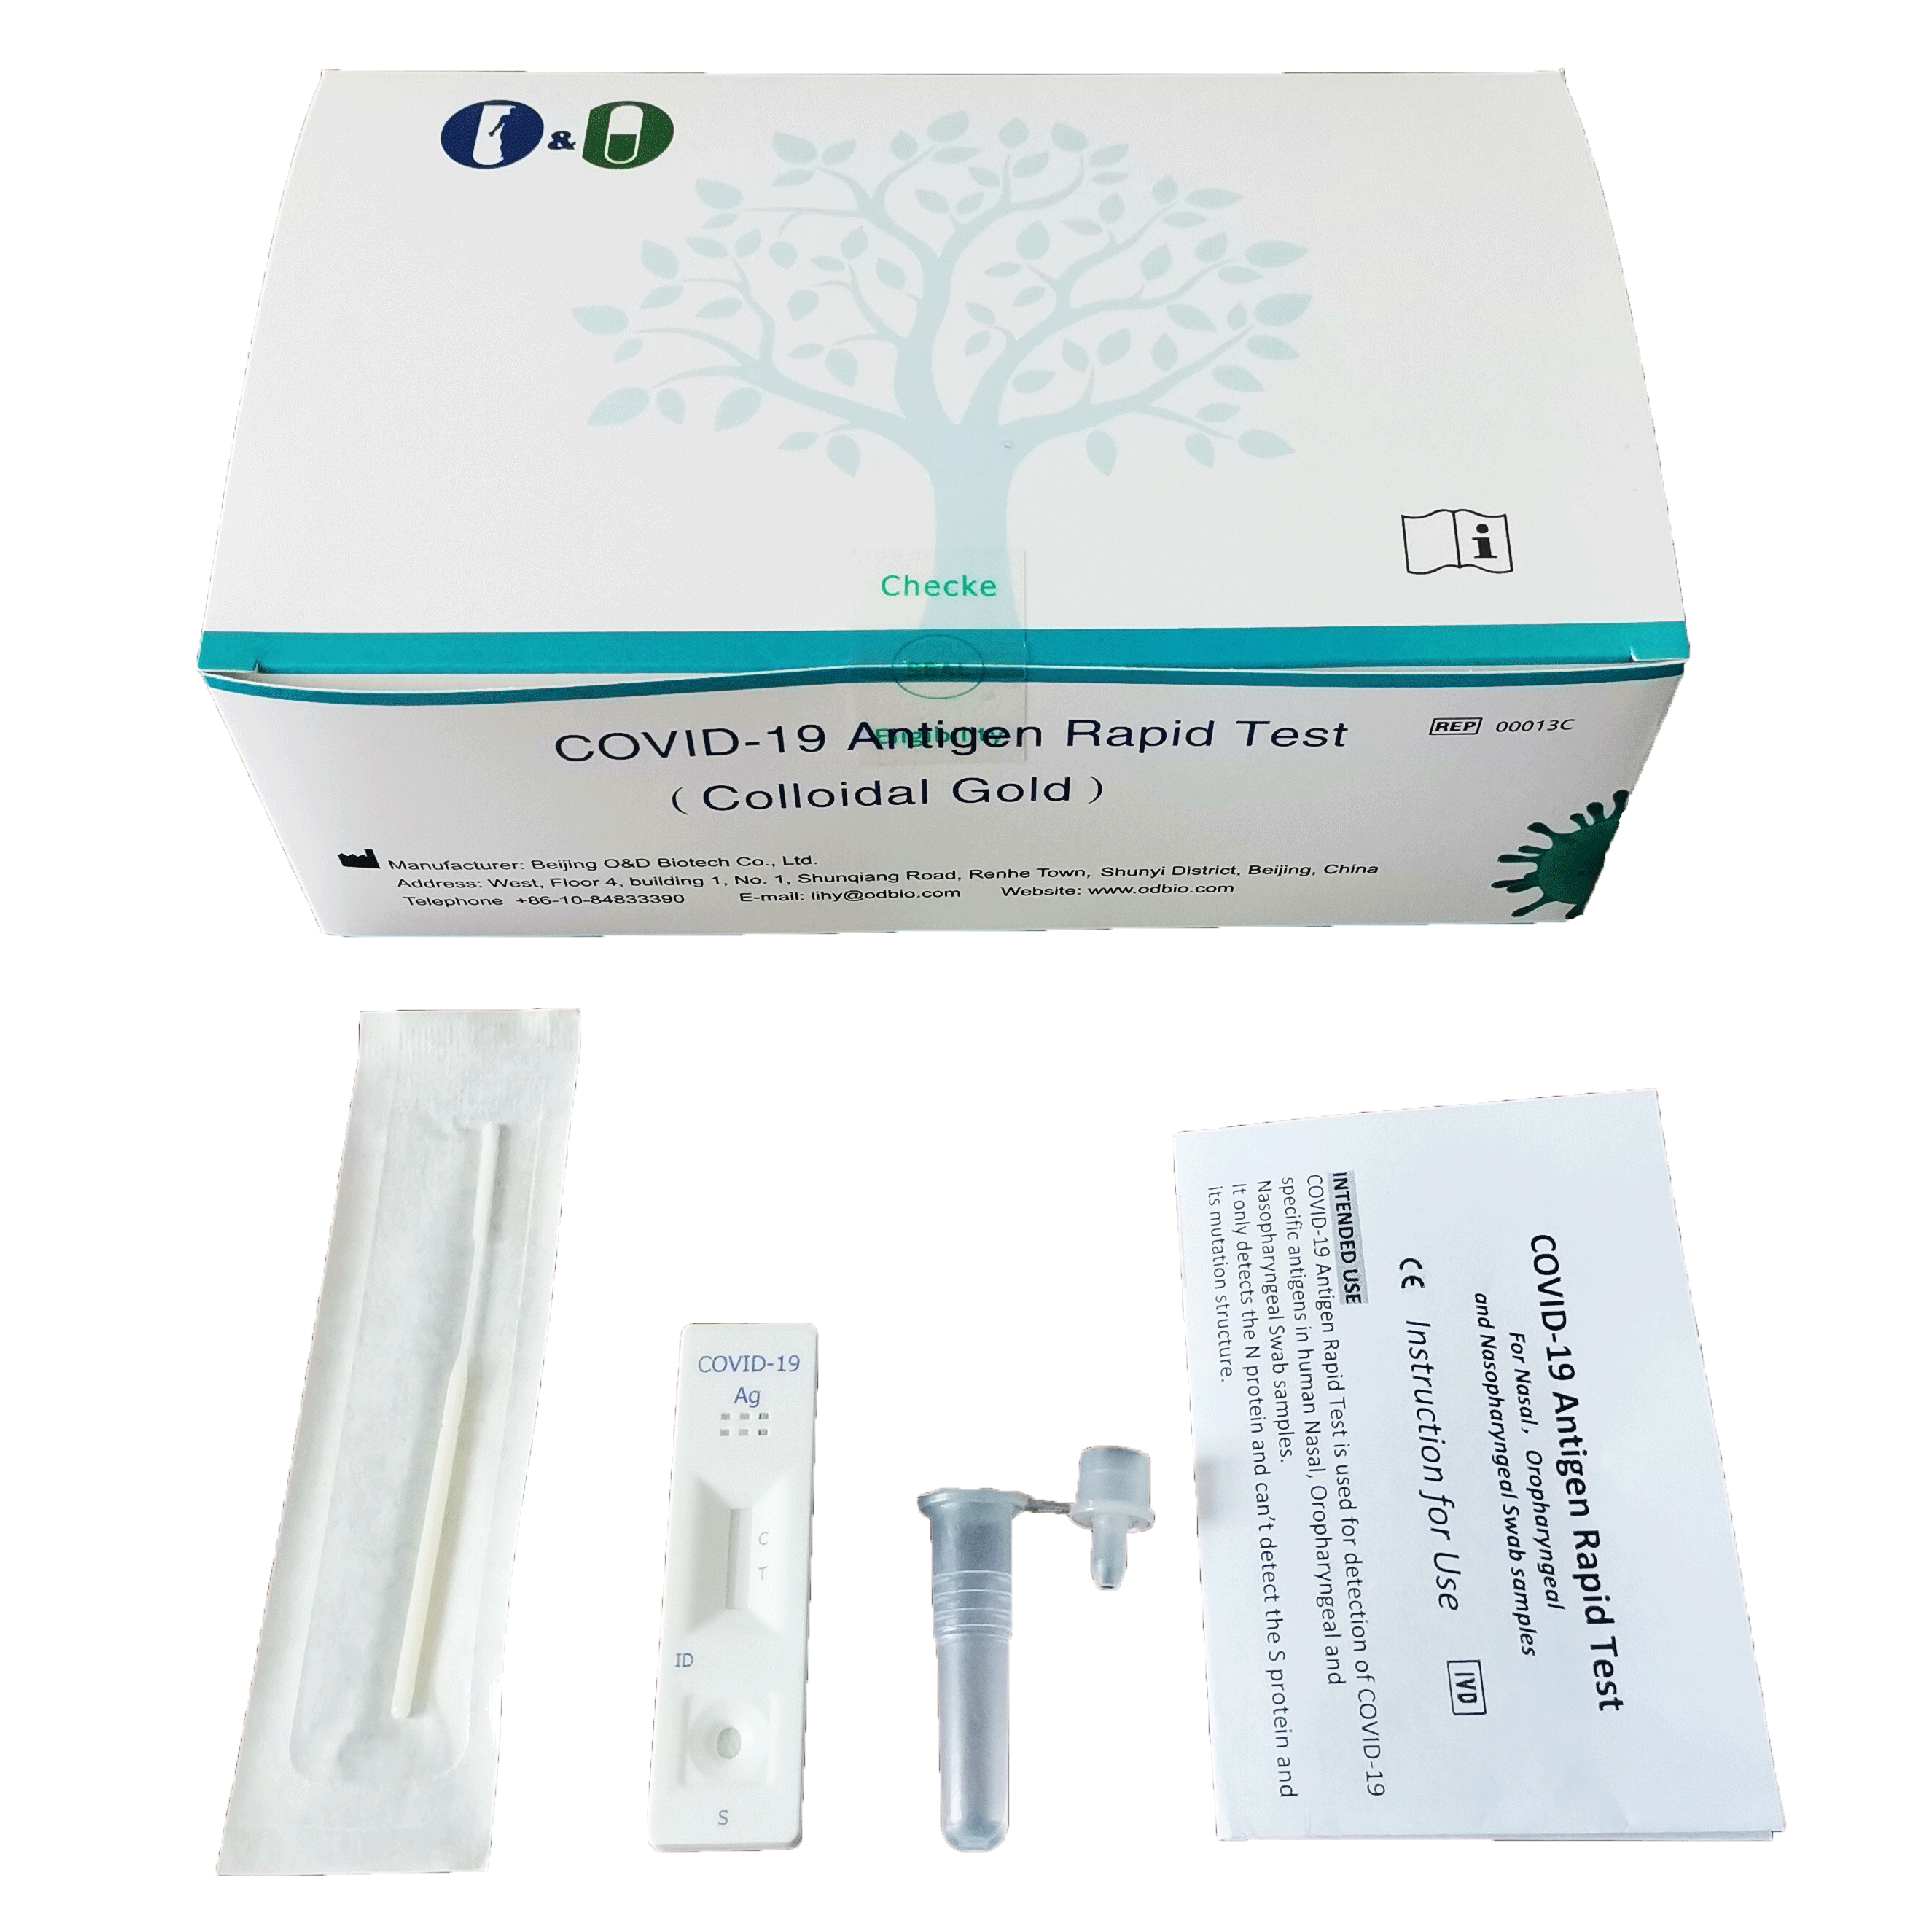 COVID-19 Antigen Rapid Test for Professional Use